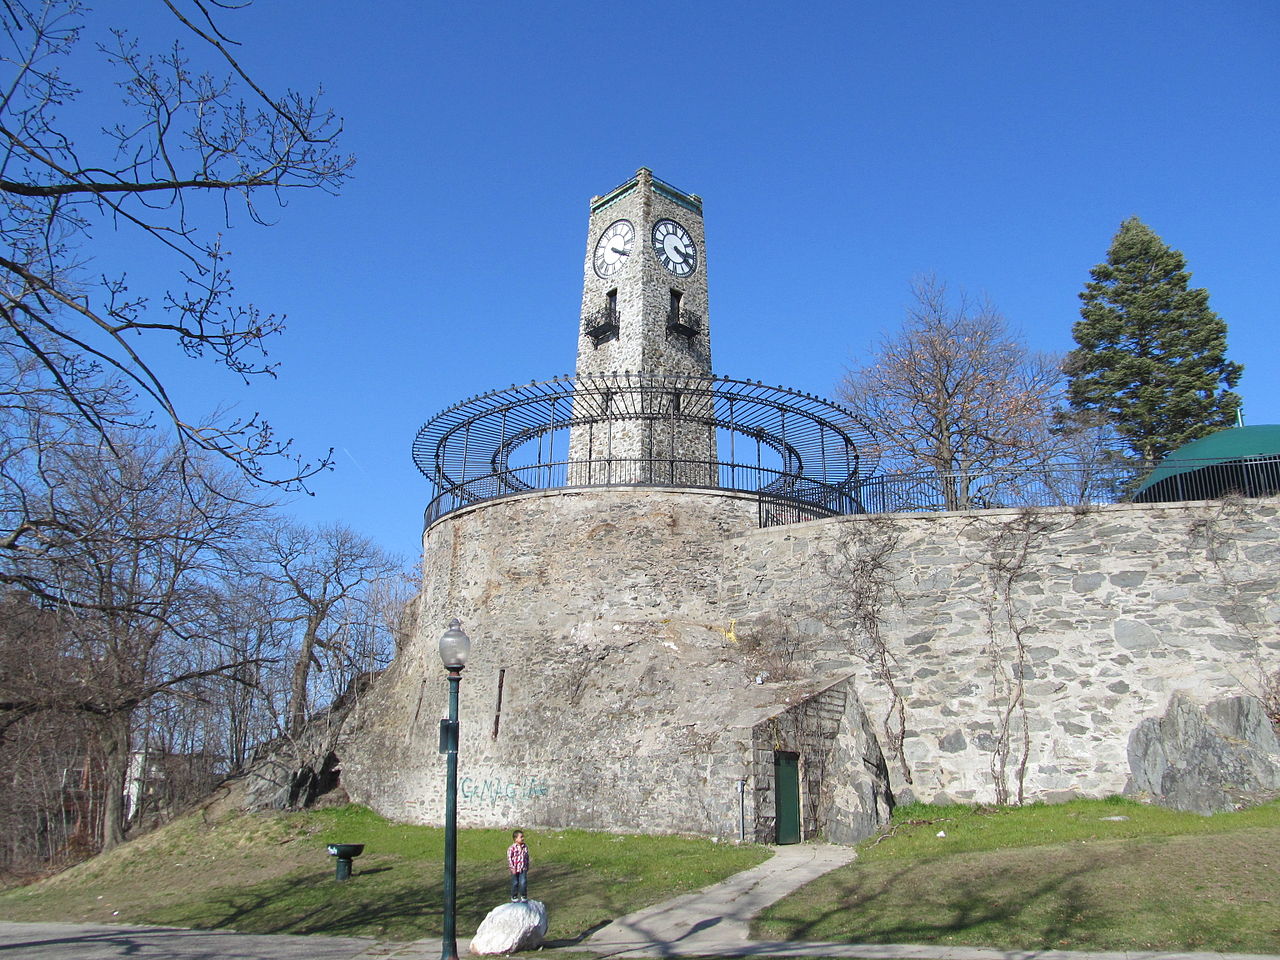 The Cogswell Tower